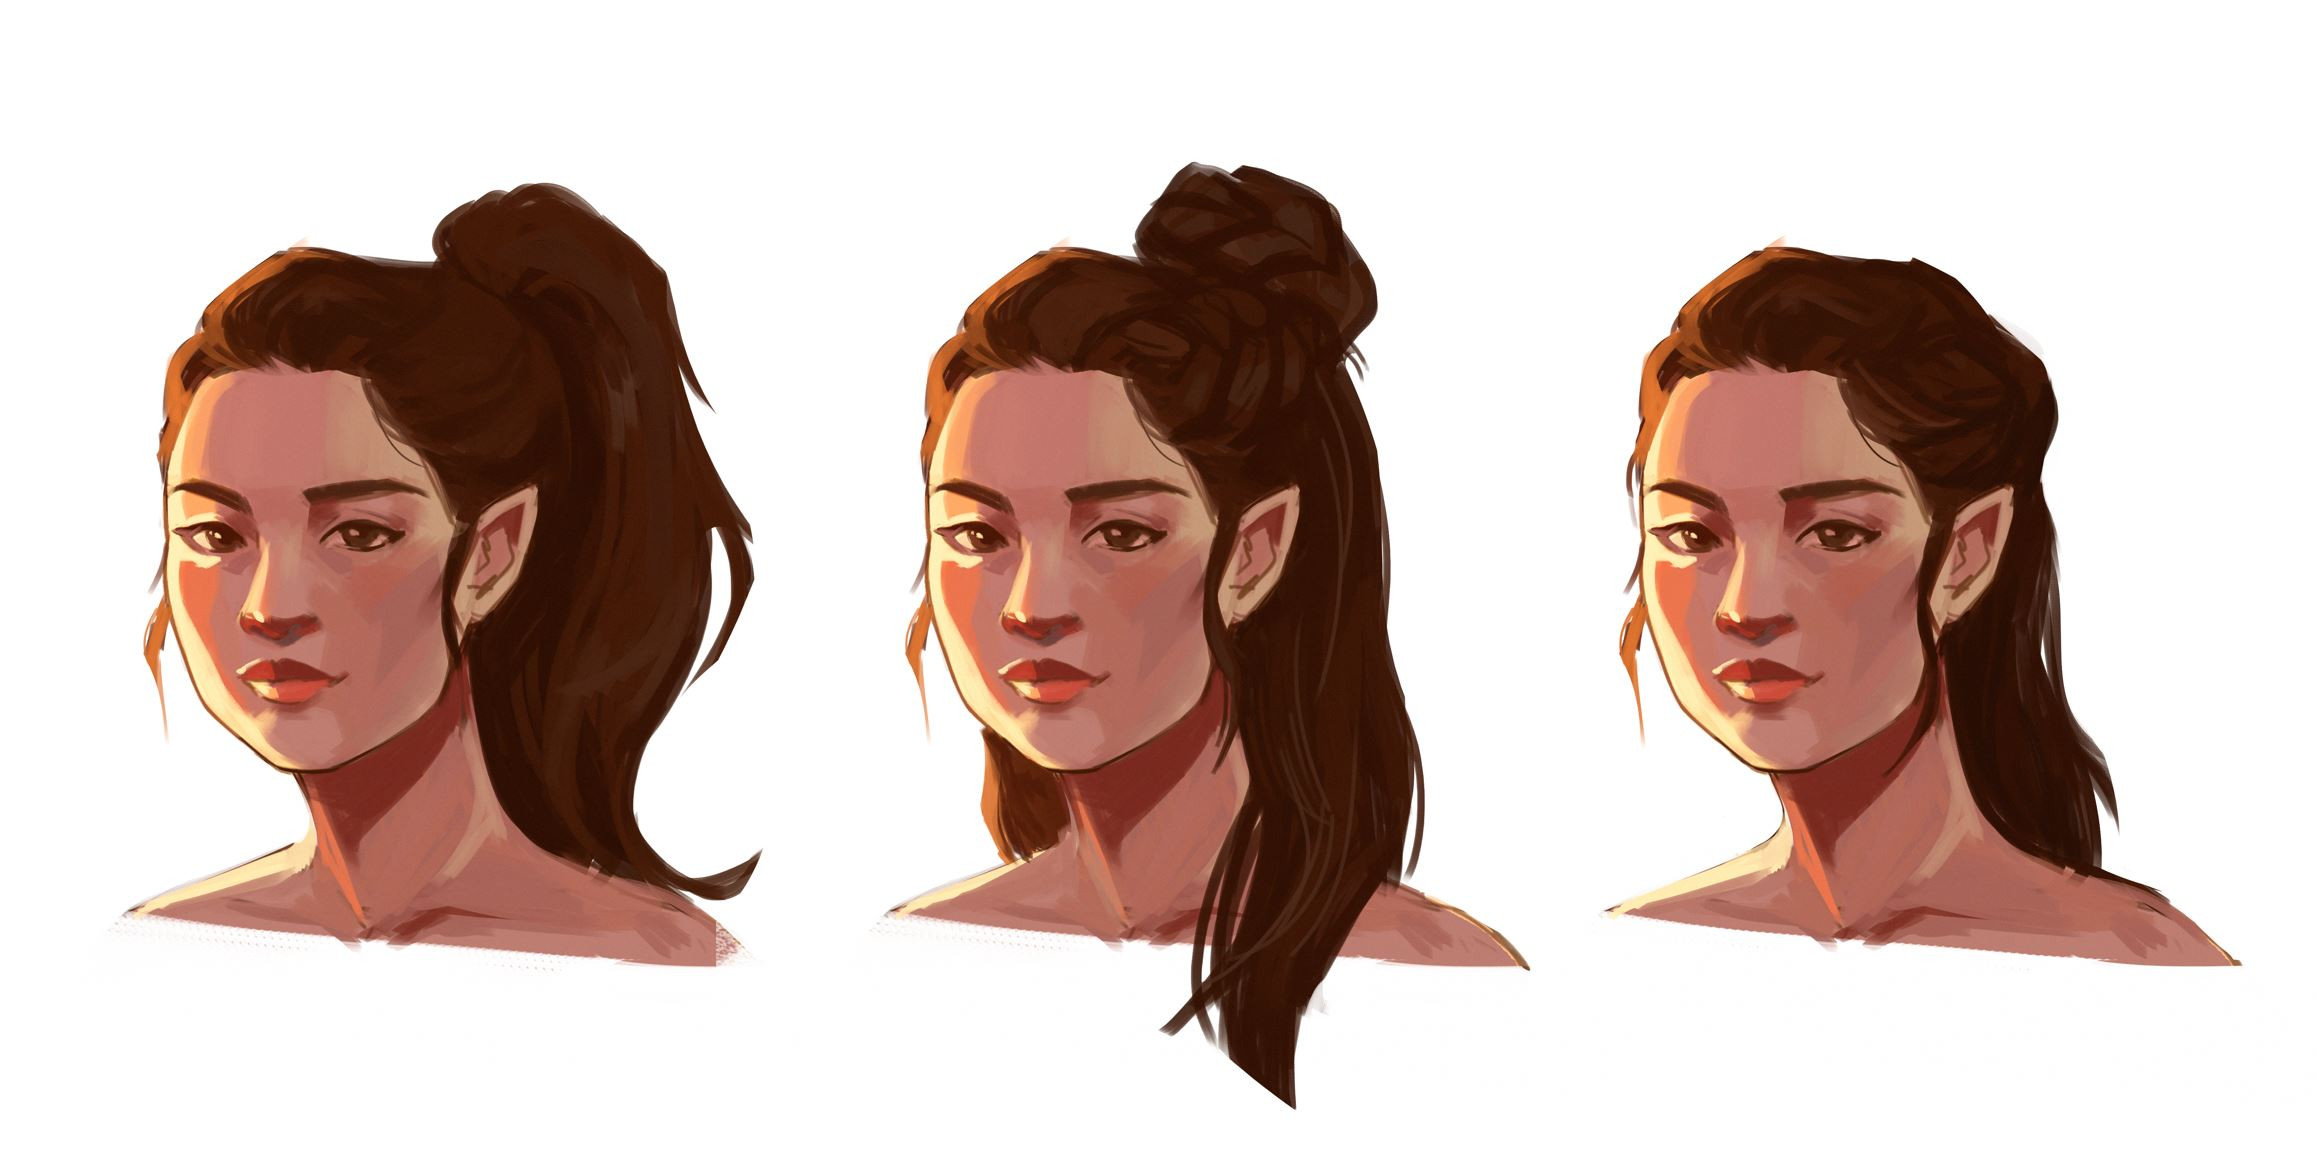 Hair Iterations for a personal project